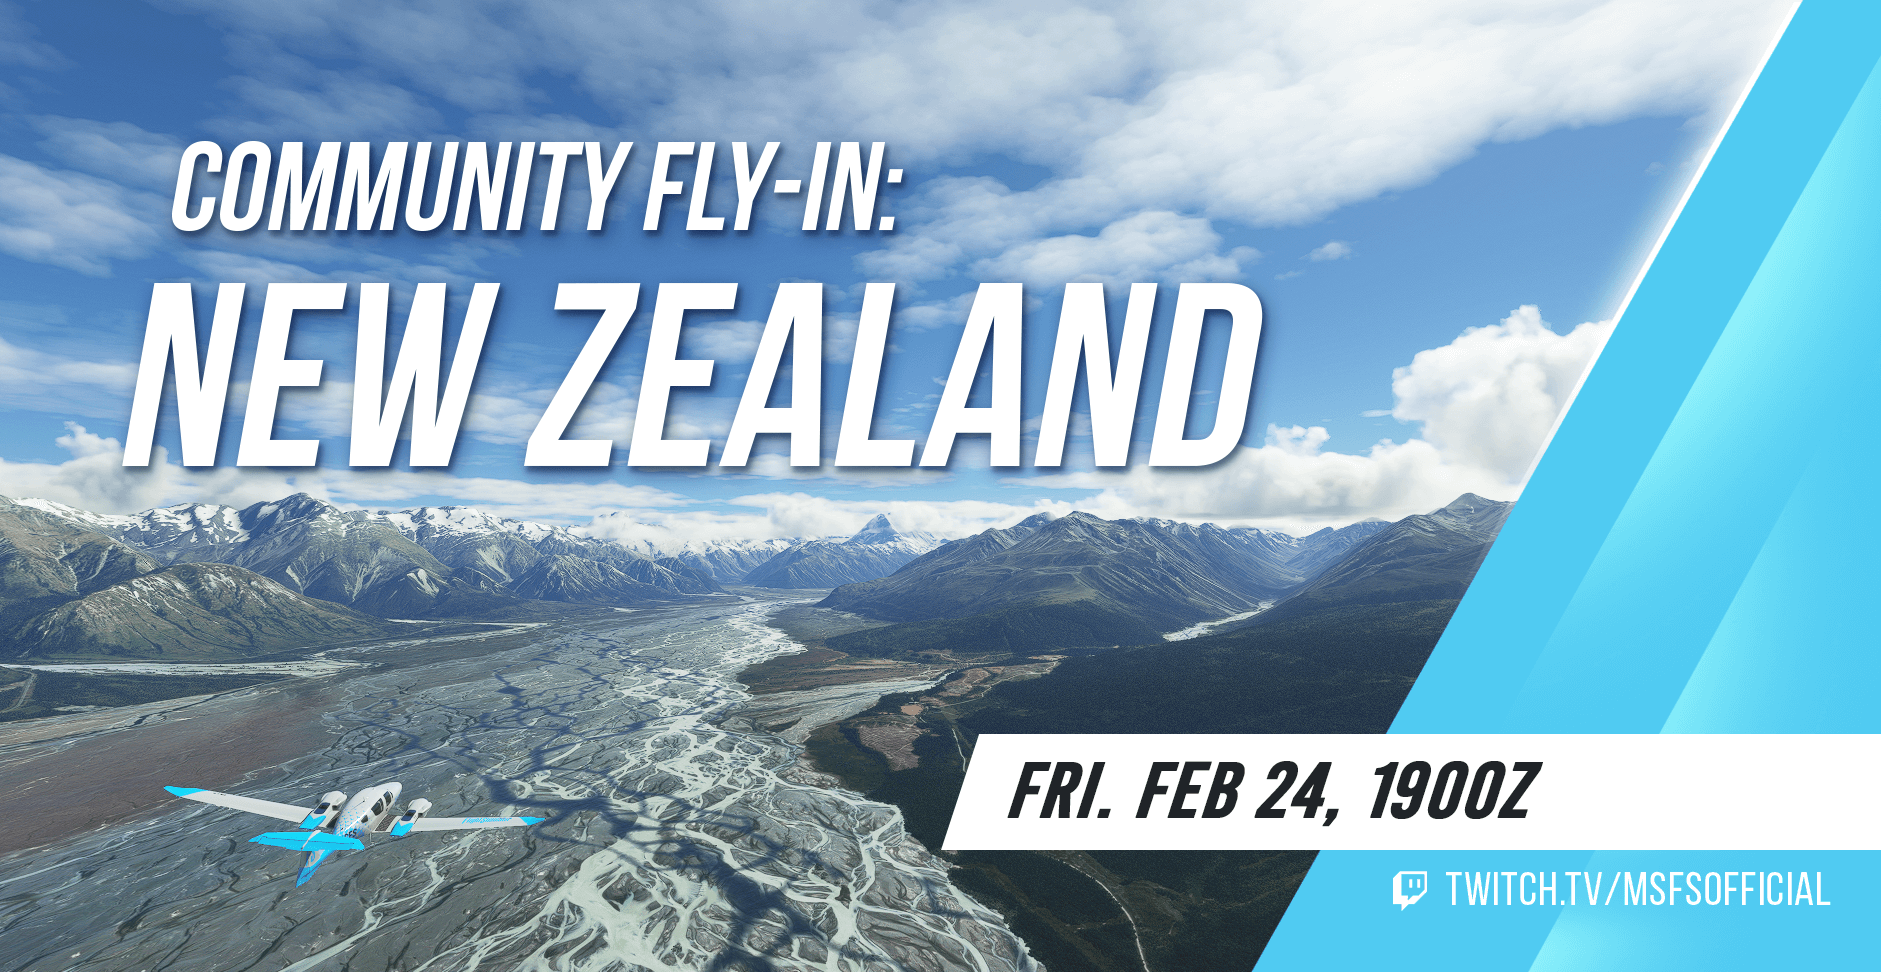 An aircraft flies over the Tasman river in New Zealand. Community Fly-In: New Zealand. Friday, March 24th at 1900Z. Watch at twitch.tv/msfsofficial.